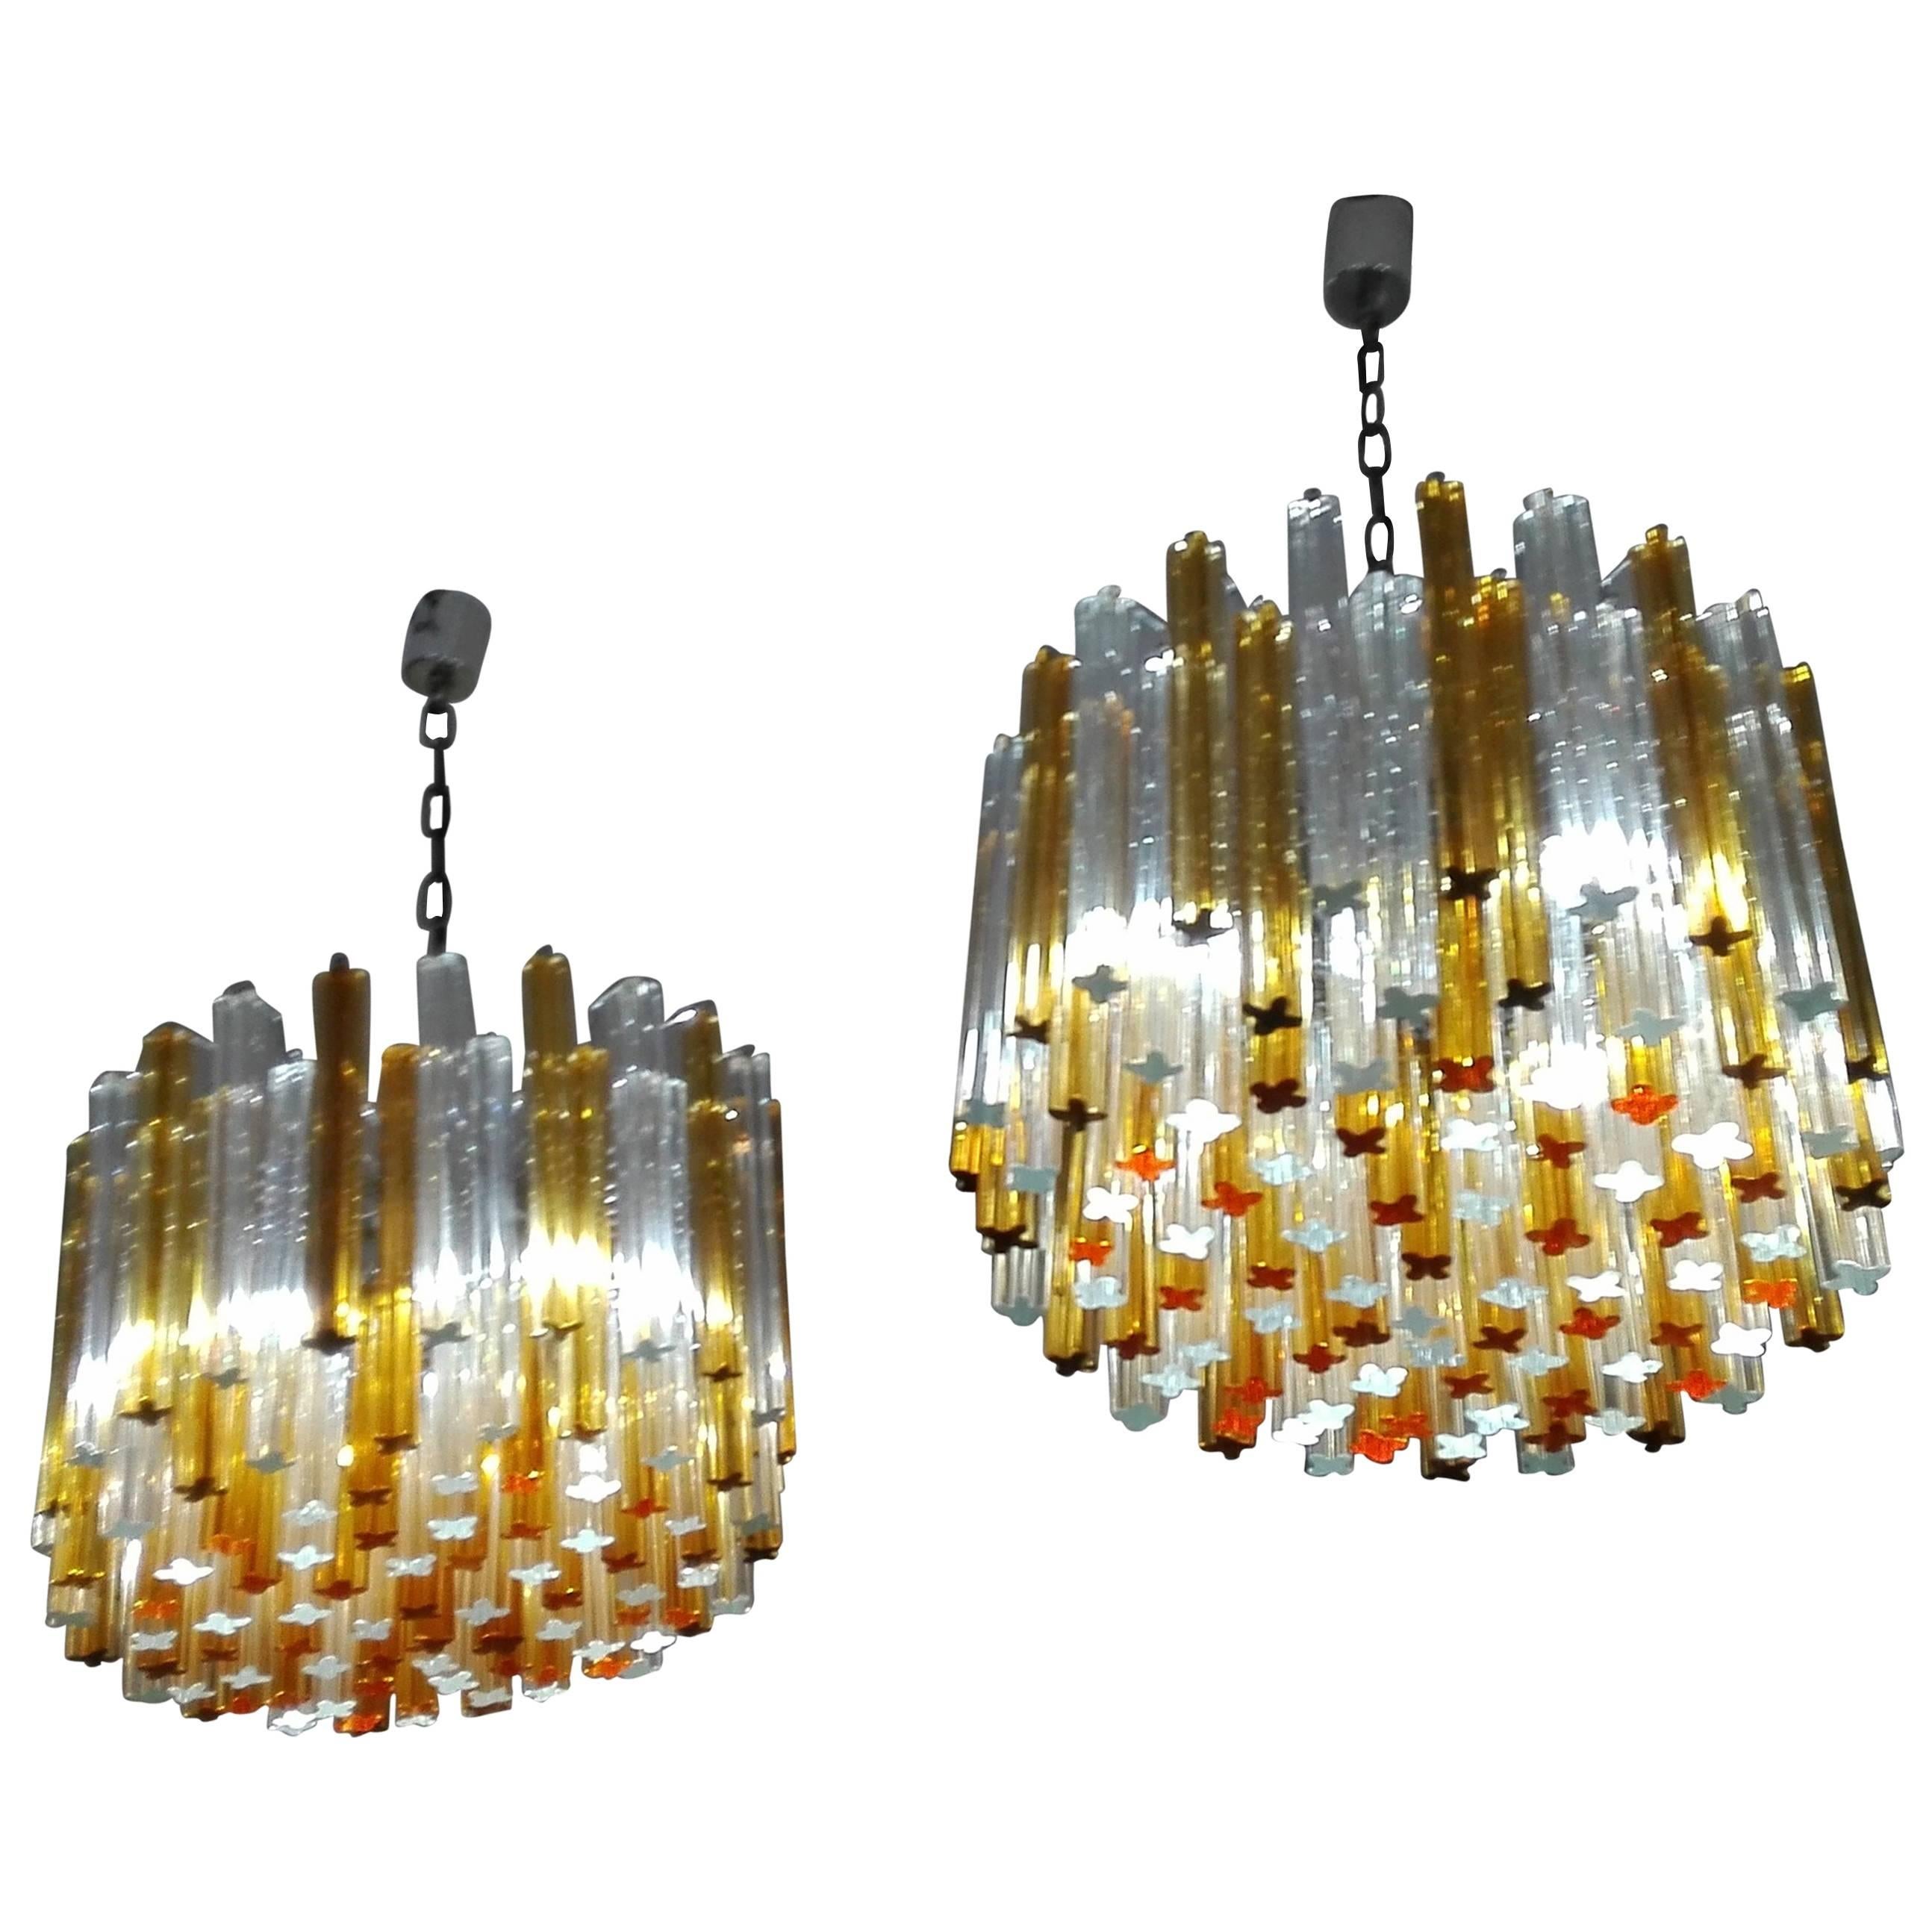 Pair of Midcentury Italian Chandeliers by Venini with Waterfall Prisms